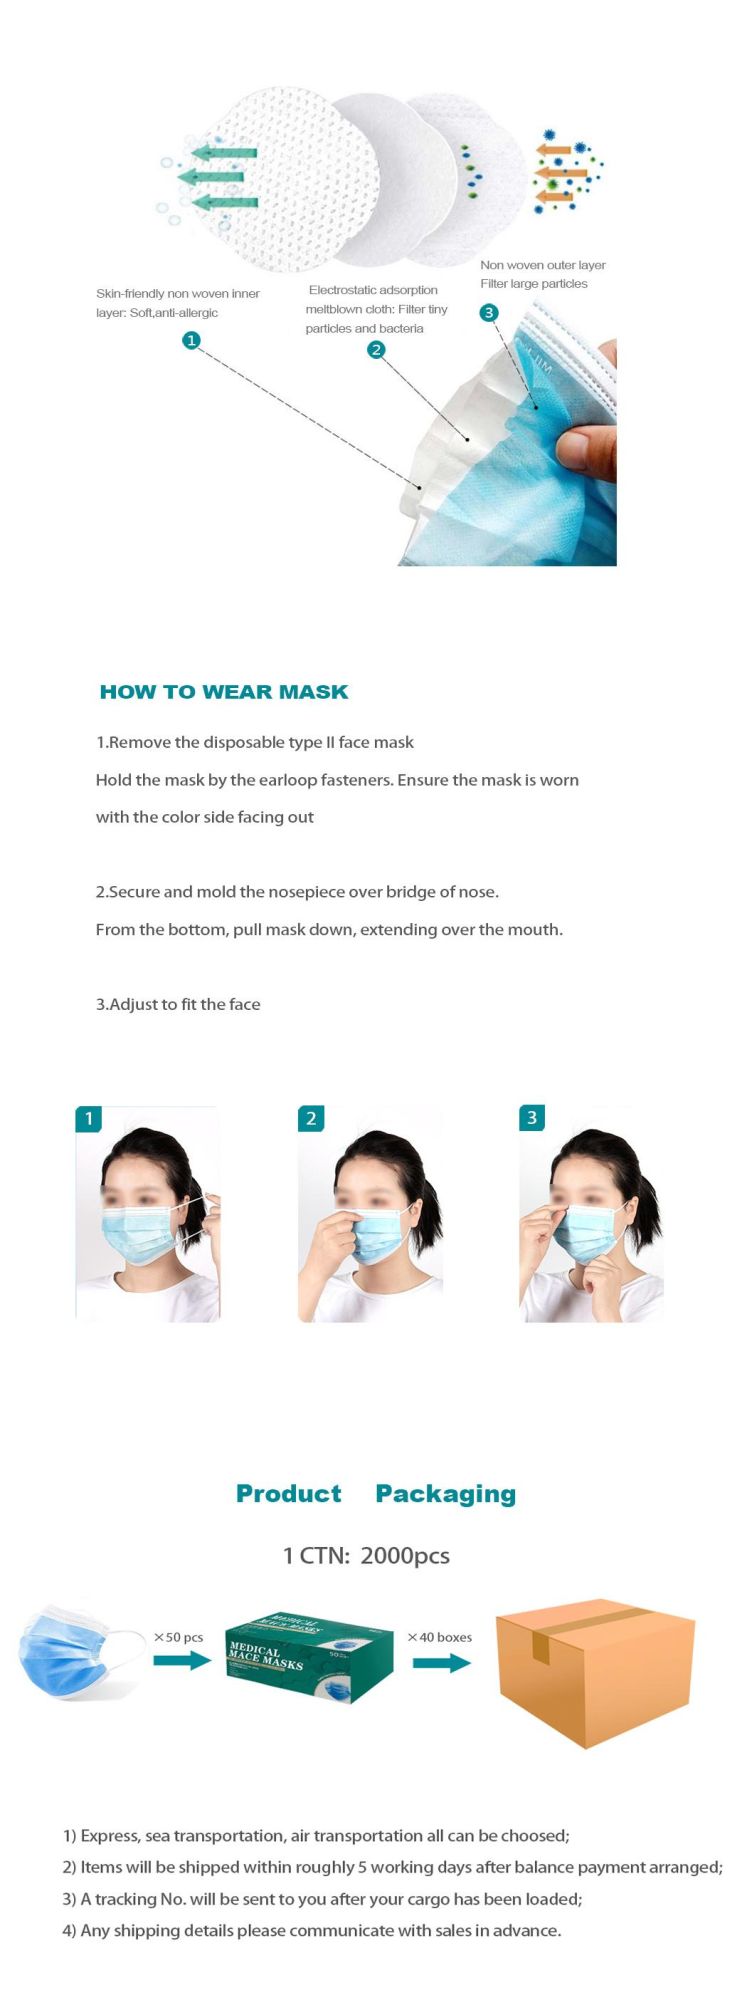 High Quality Disposable 3 Ply Earloop Individual Pack Level 1/2/3 Respirator